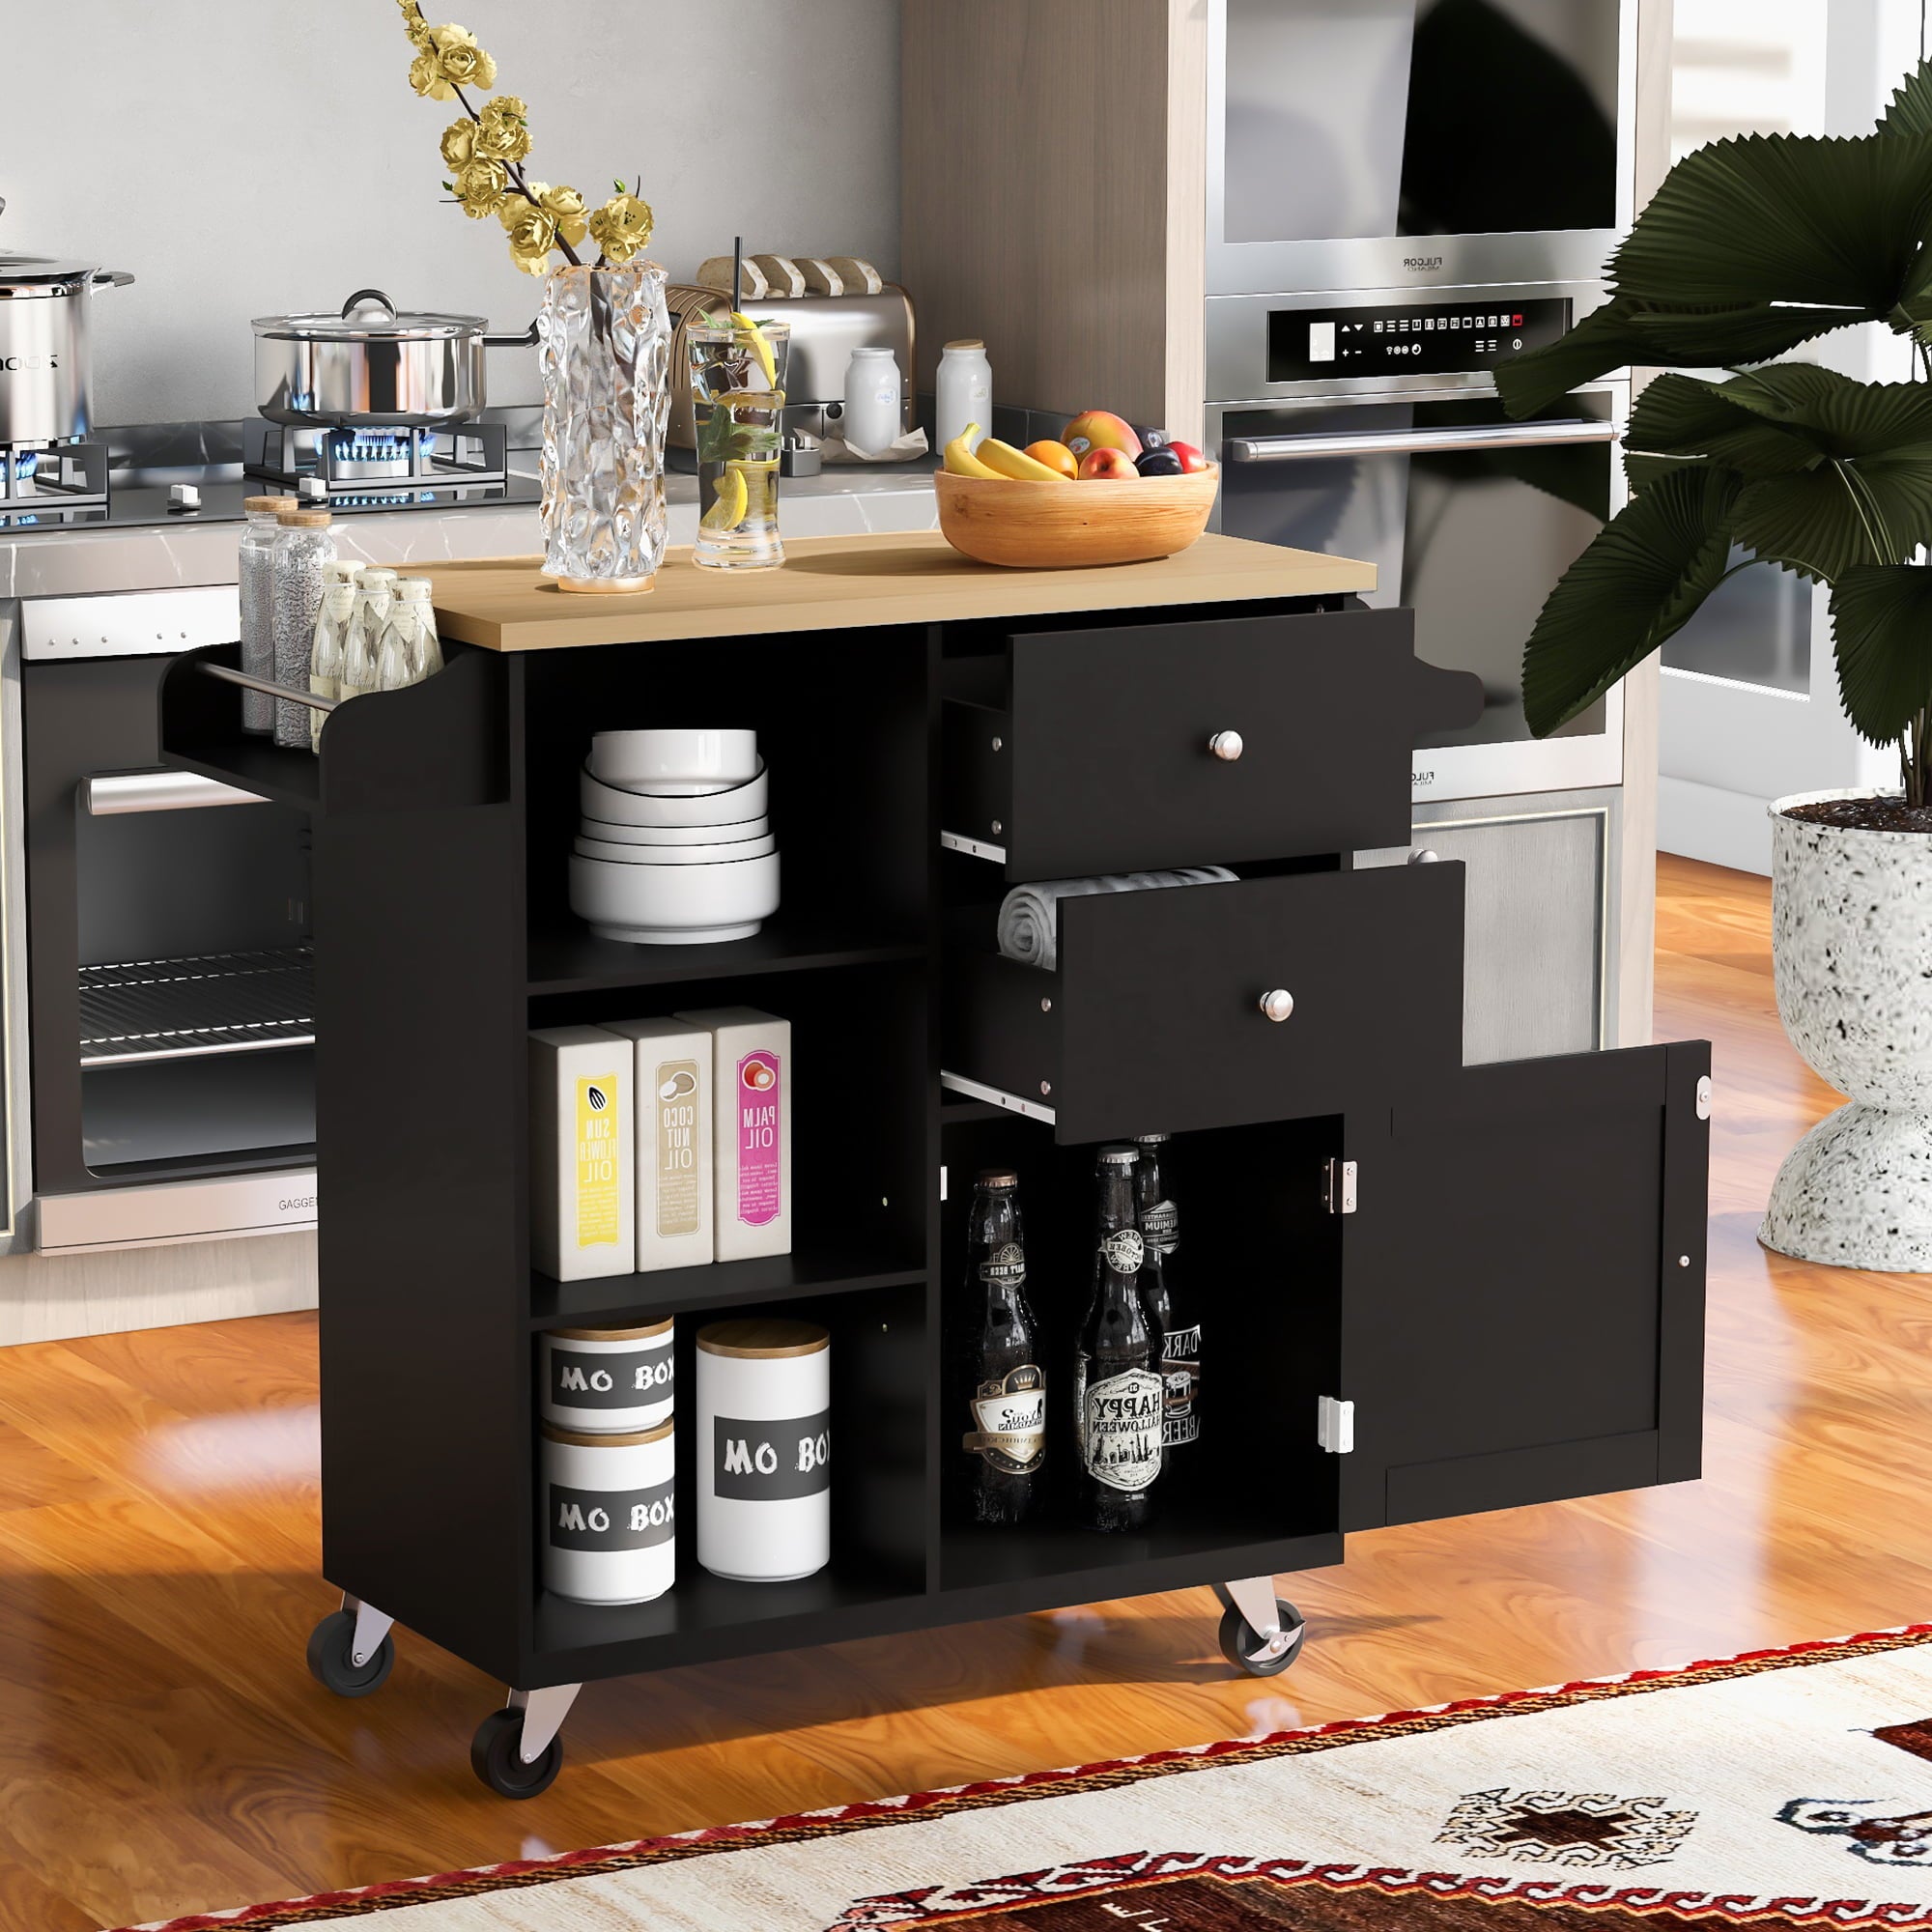 Kitchen Cart with Wheels， HSUNNS Wood Top Kitchen Island Cart with Storage Drawers|Open Shelves|Spice Rack|Towel Rack， Rolling Kitchen Cabinet Trolley Cart， Black